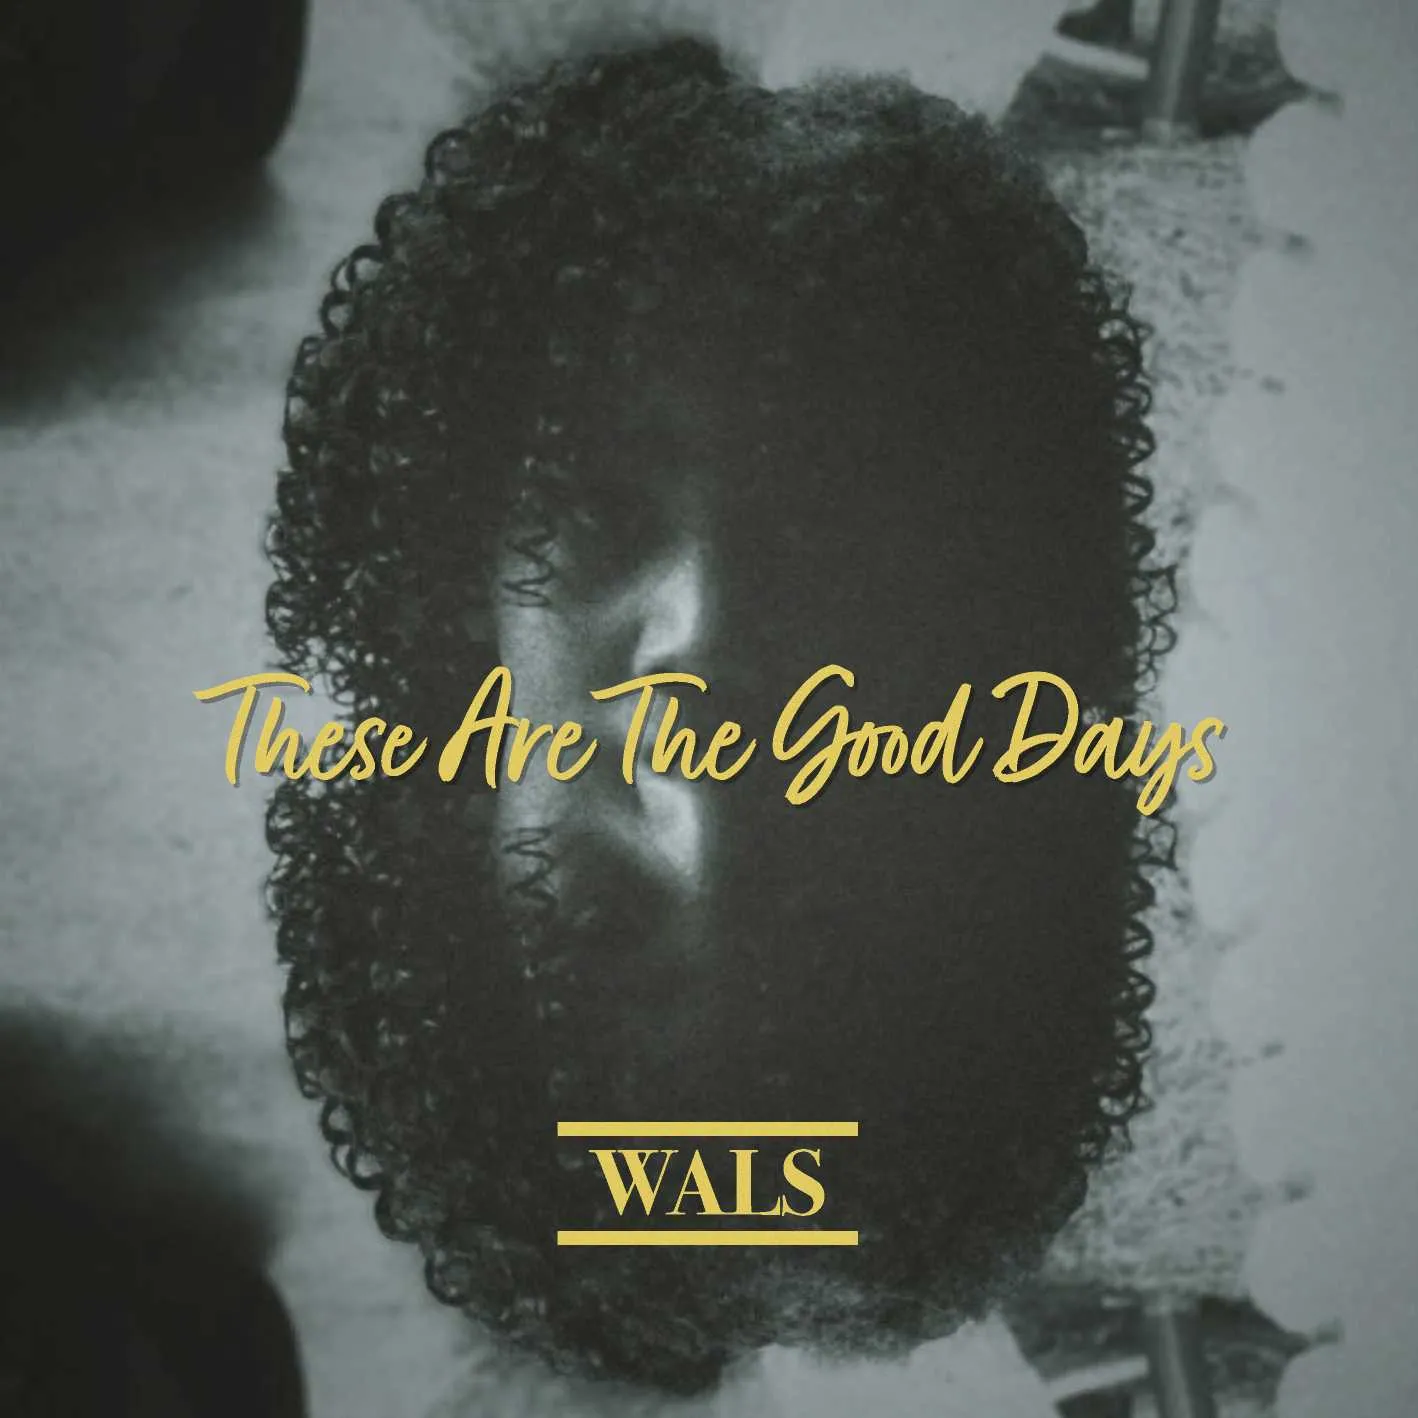 Album cover for “These Are The Good Days” by Wals